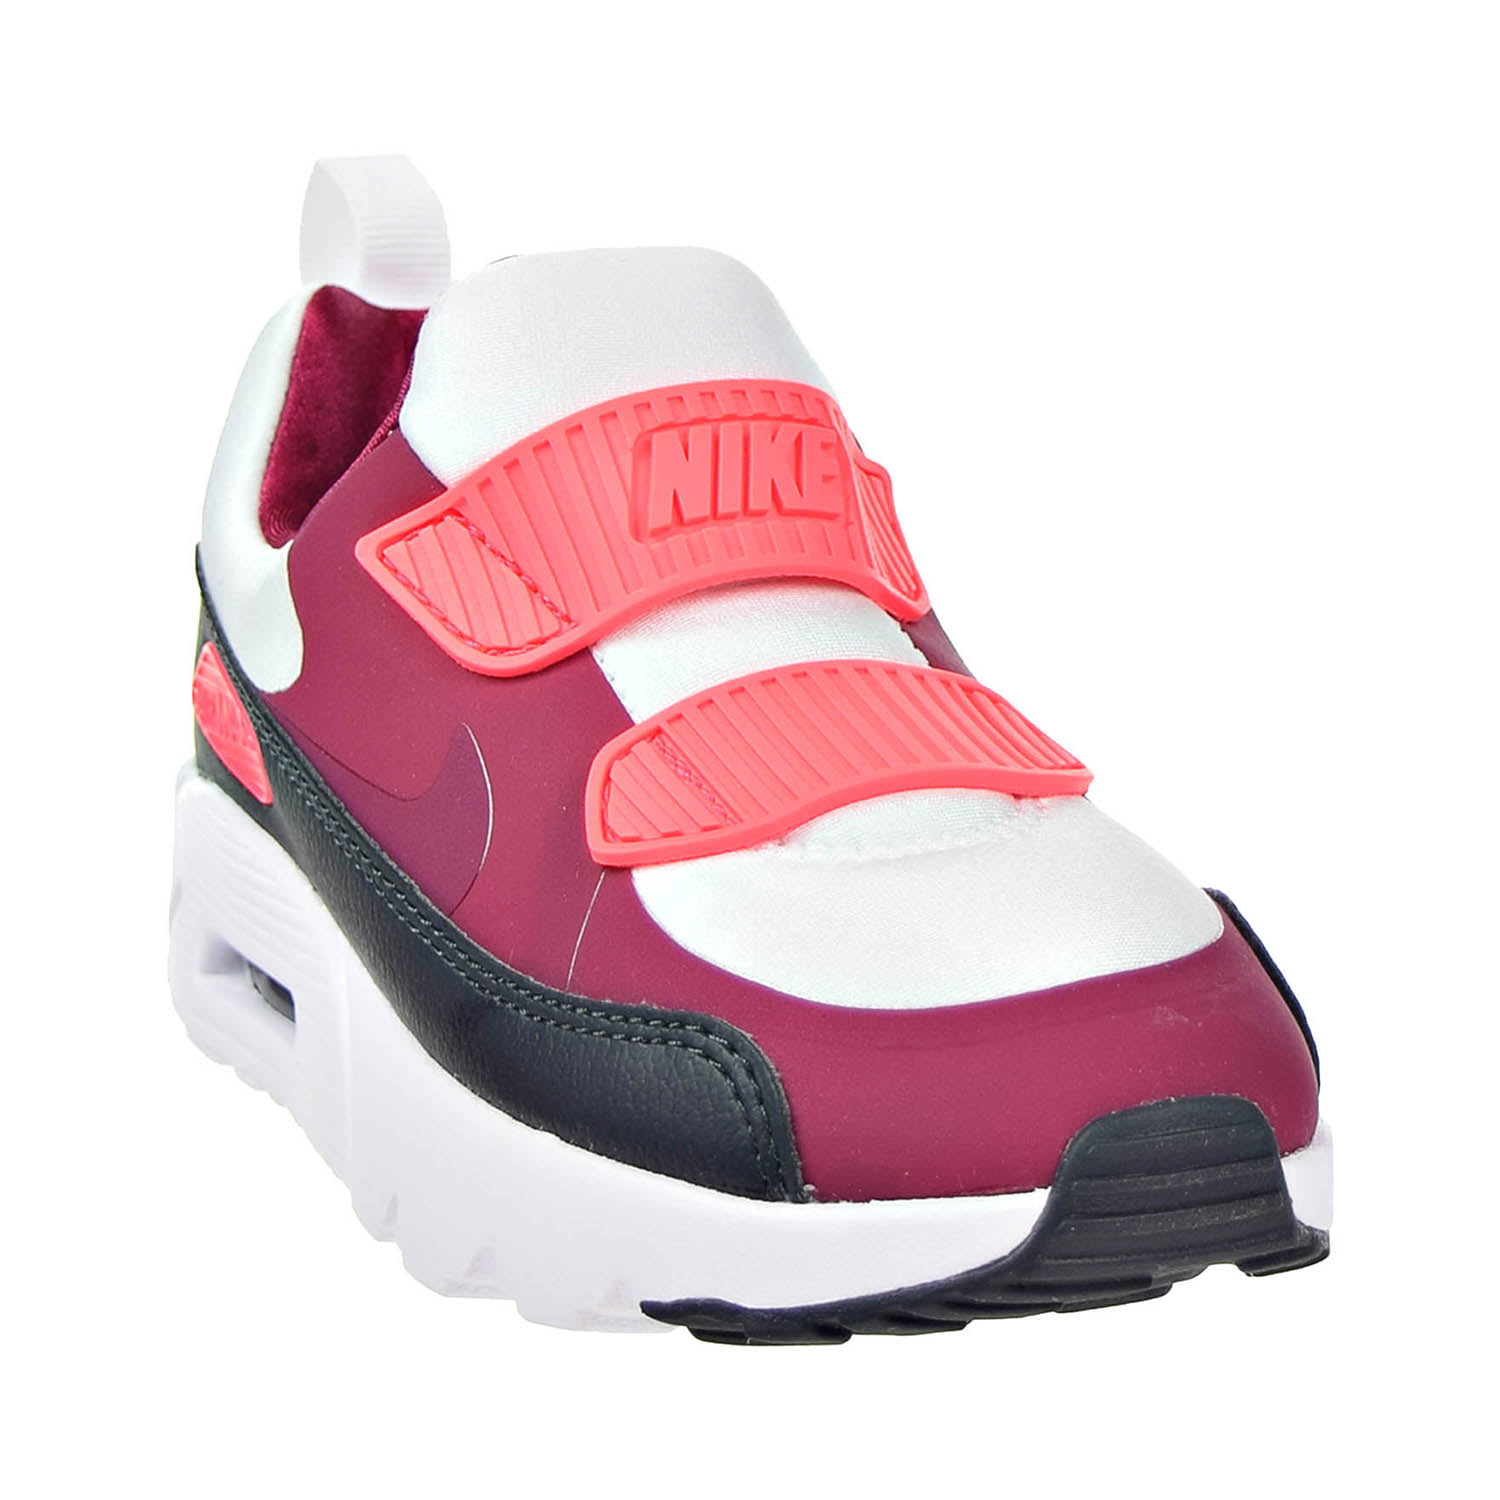 Nike Air Max Tiny 90 (PS) Preschool Shoes White/Noble Red/Anthracite  881927-101 (13 M US)